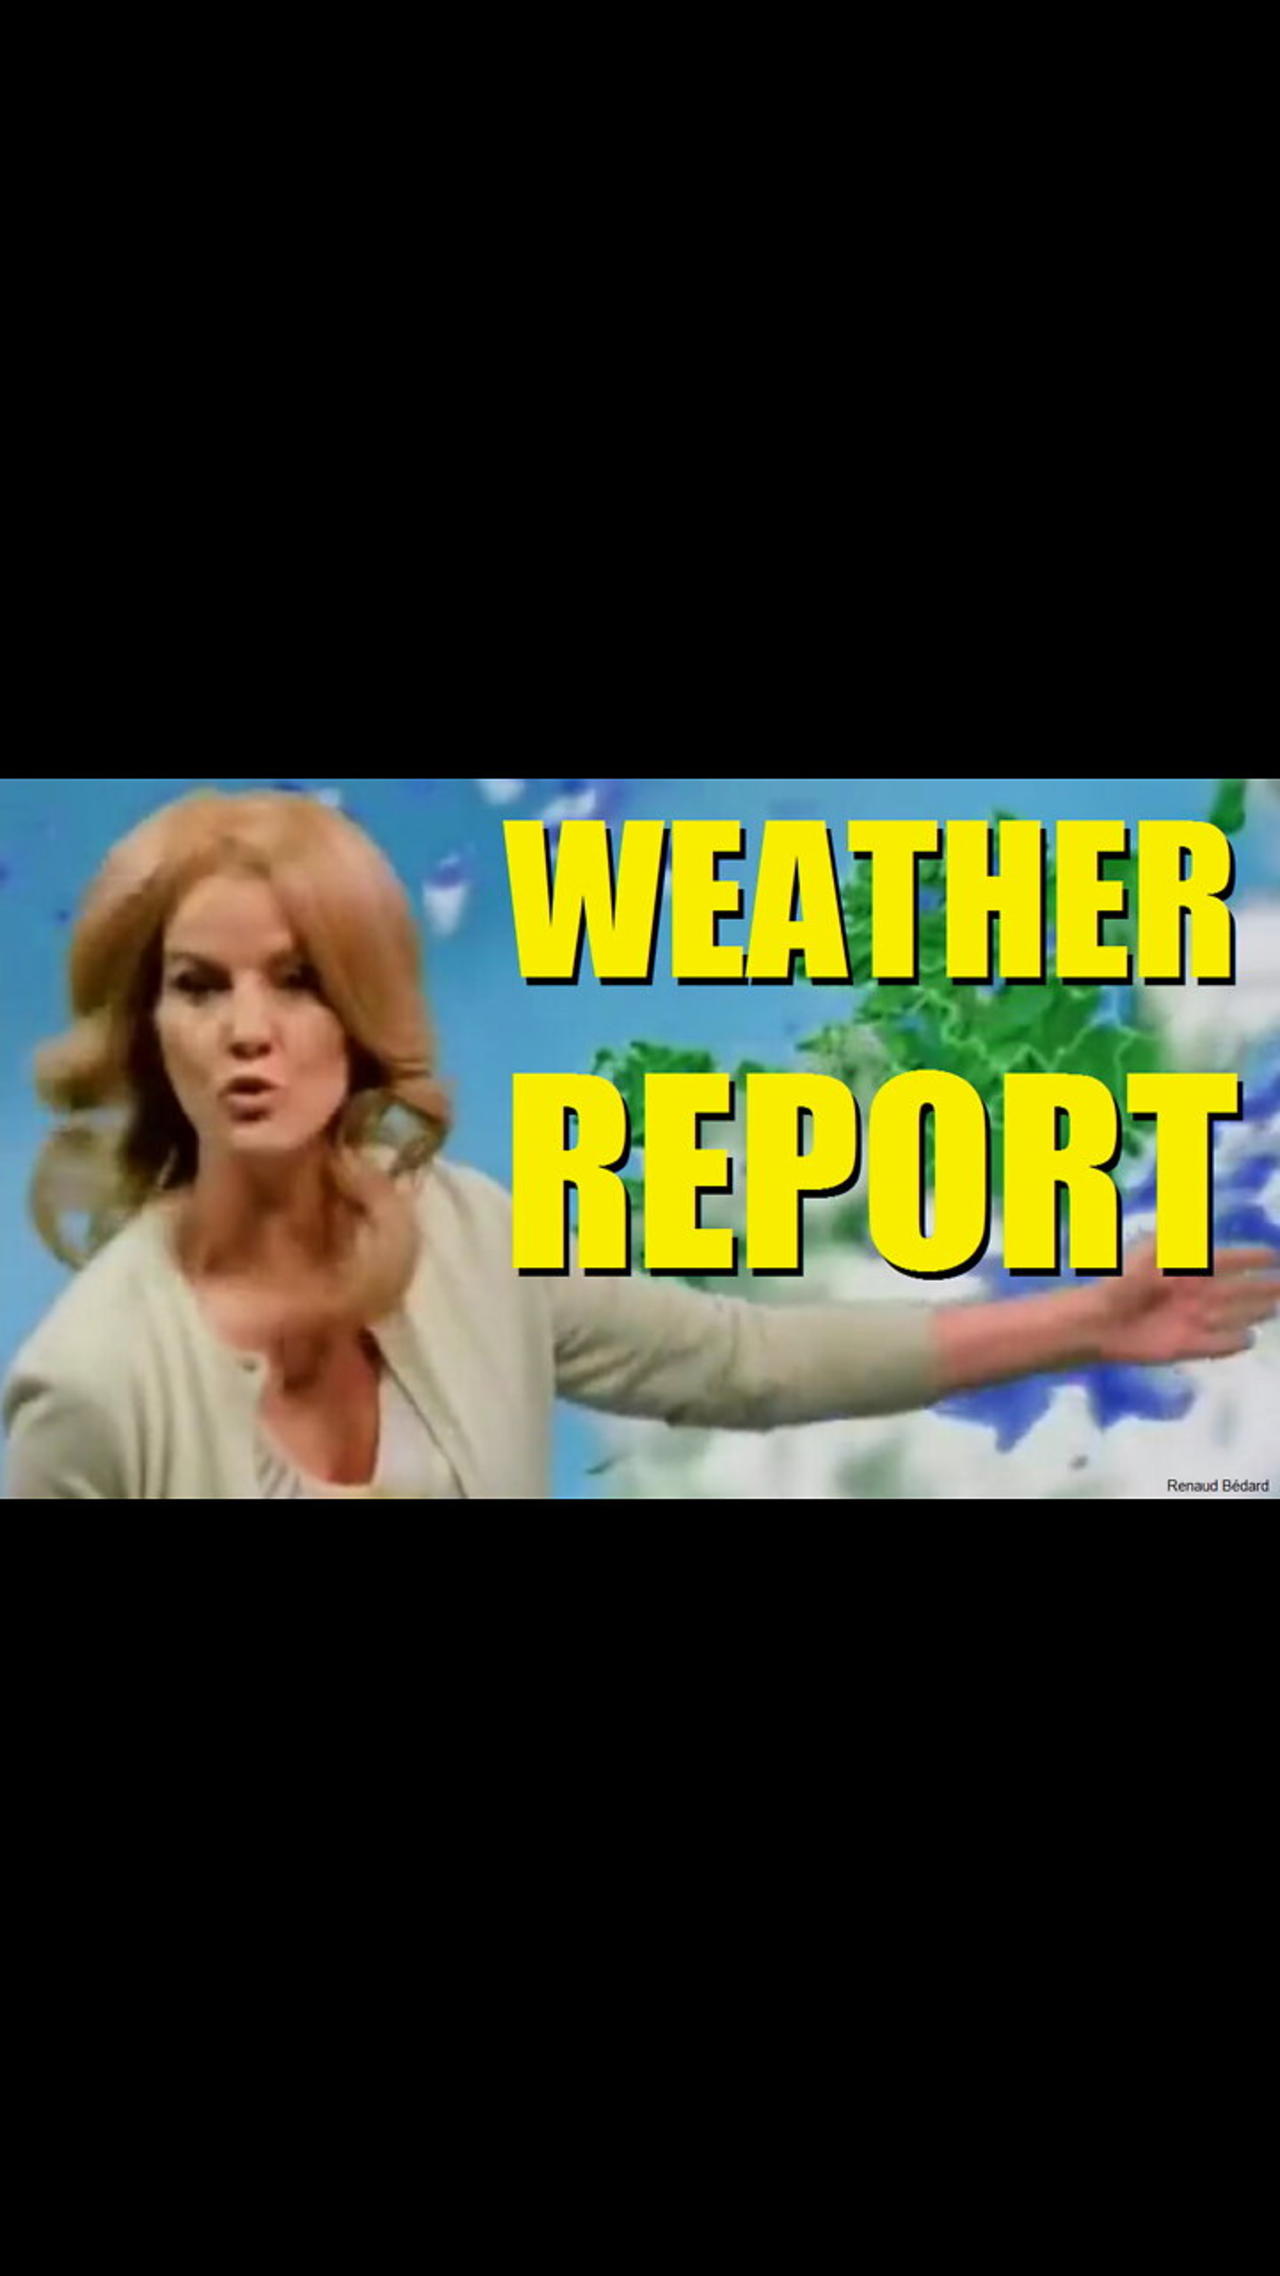 AND NOW TO THE WEATHER REPORT WITH DEIRDRE O'KANE